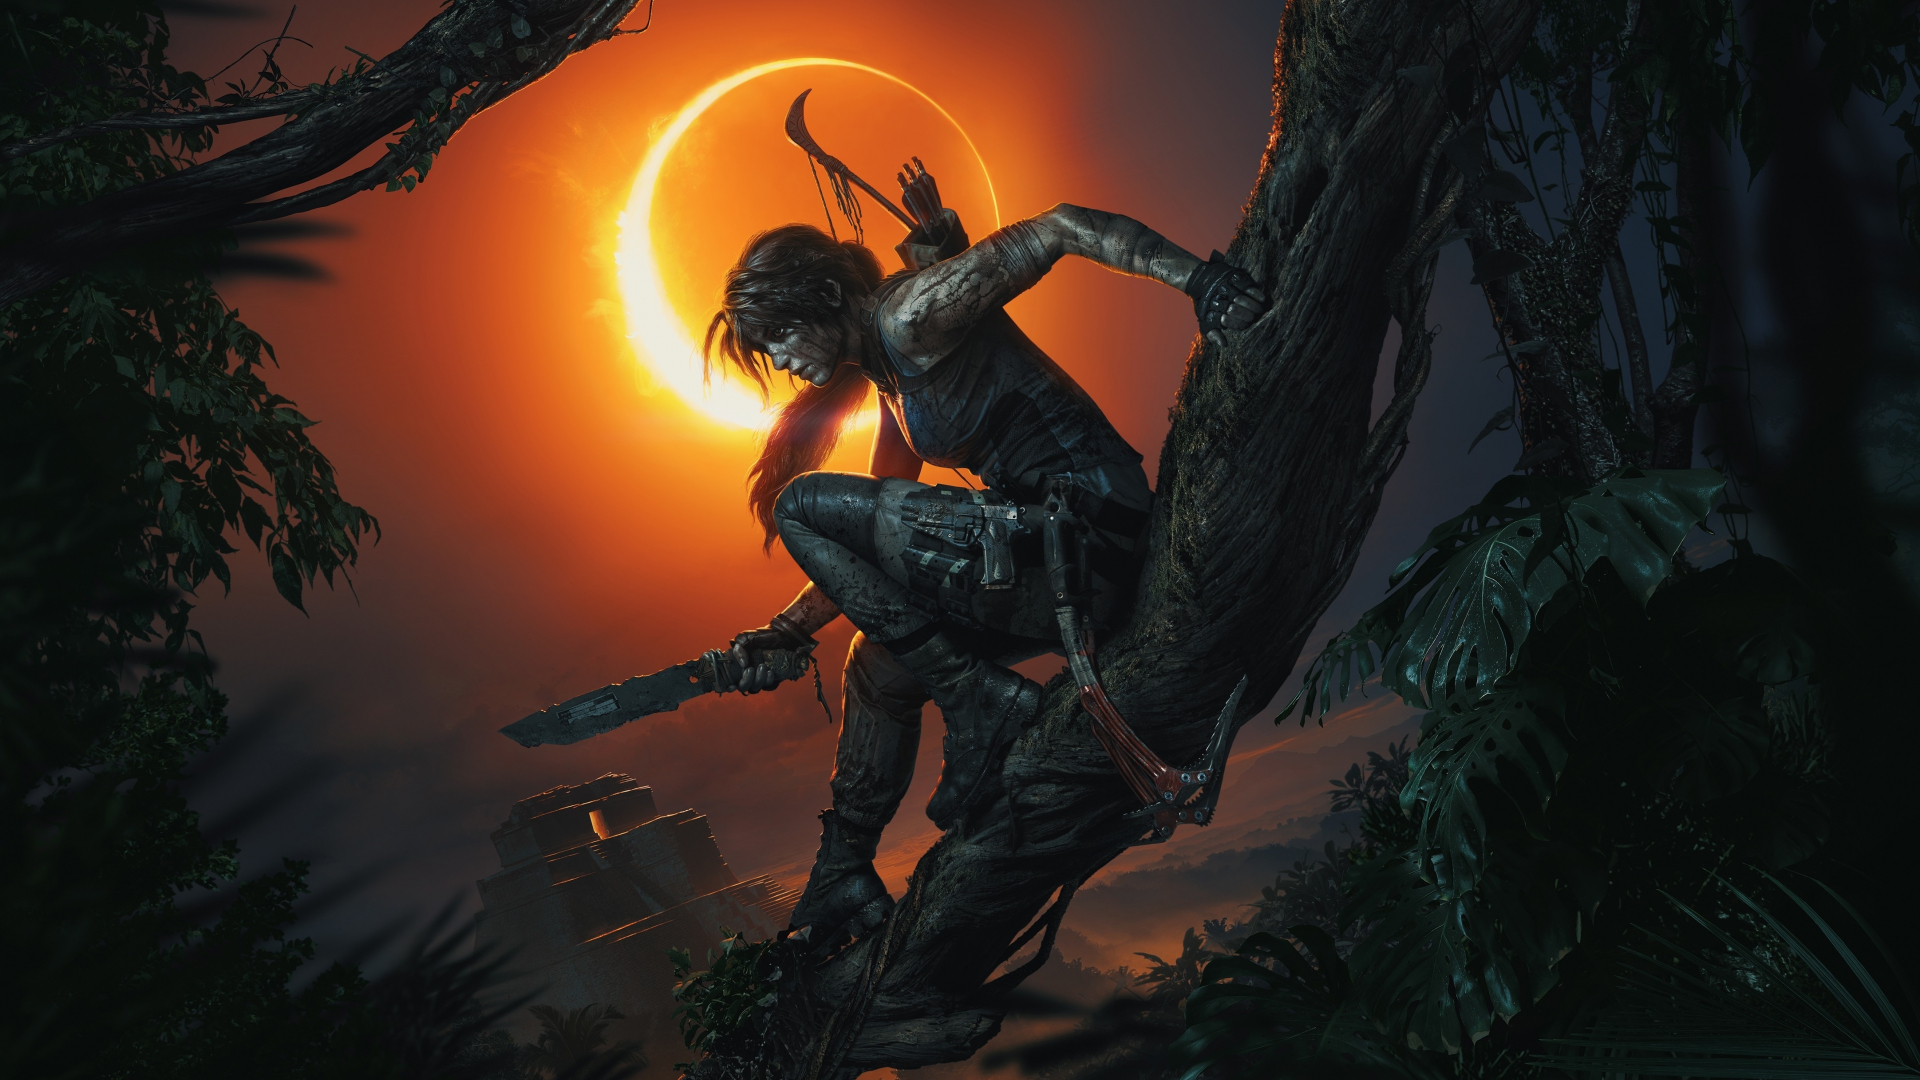 Download 1920x1080 Wallpaper Shadow Of The Tomb Raider Video Game Images, Photos, Reviews